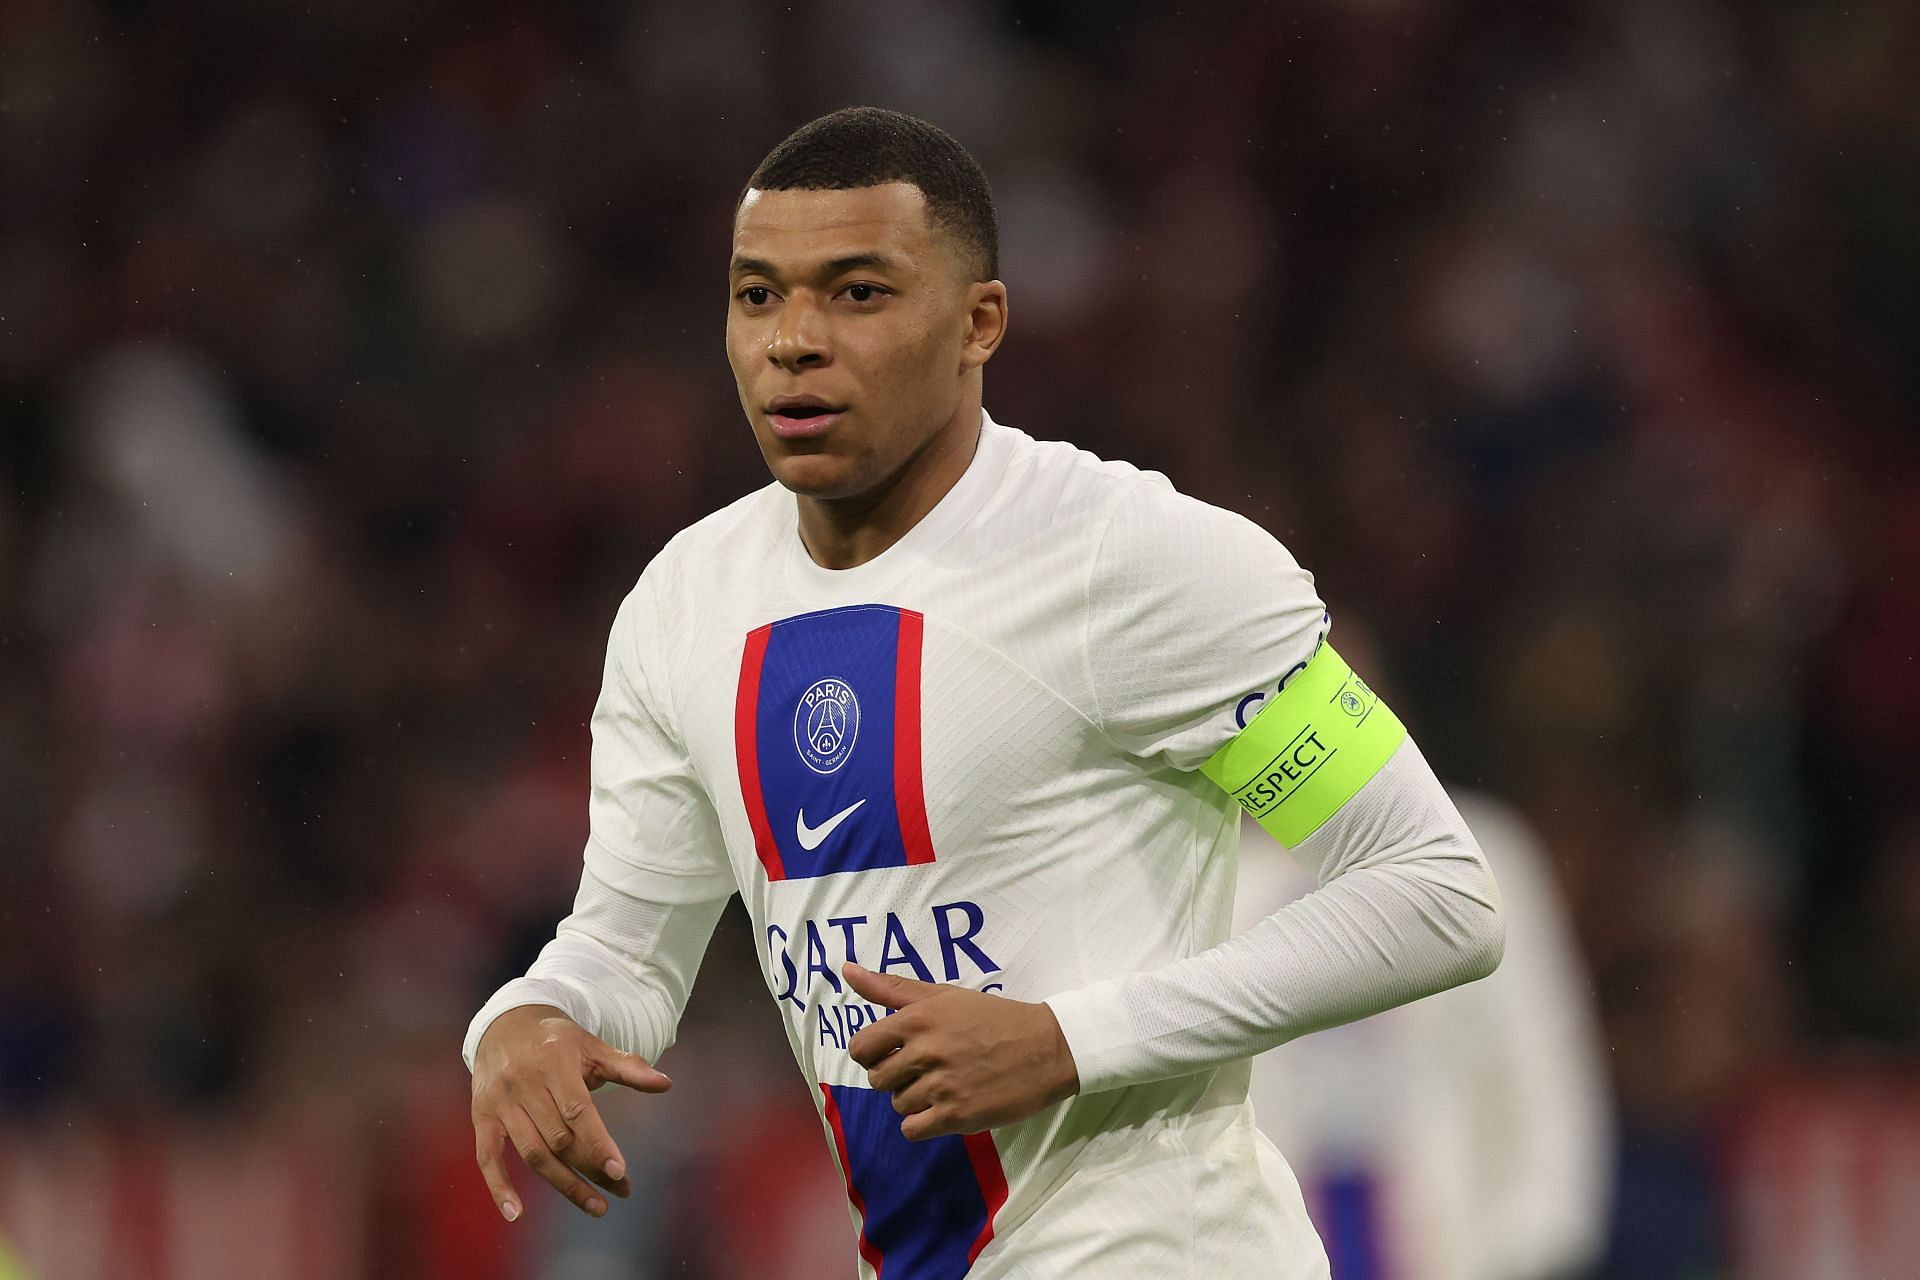 Kylian Mbappe wants PSG to sign 26-year-old Spanish international previously linked with Manchester United: Reports